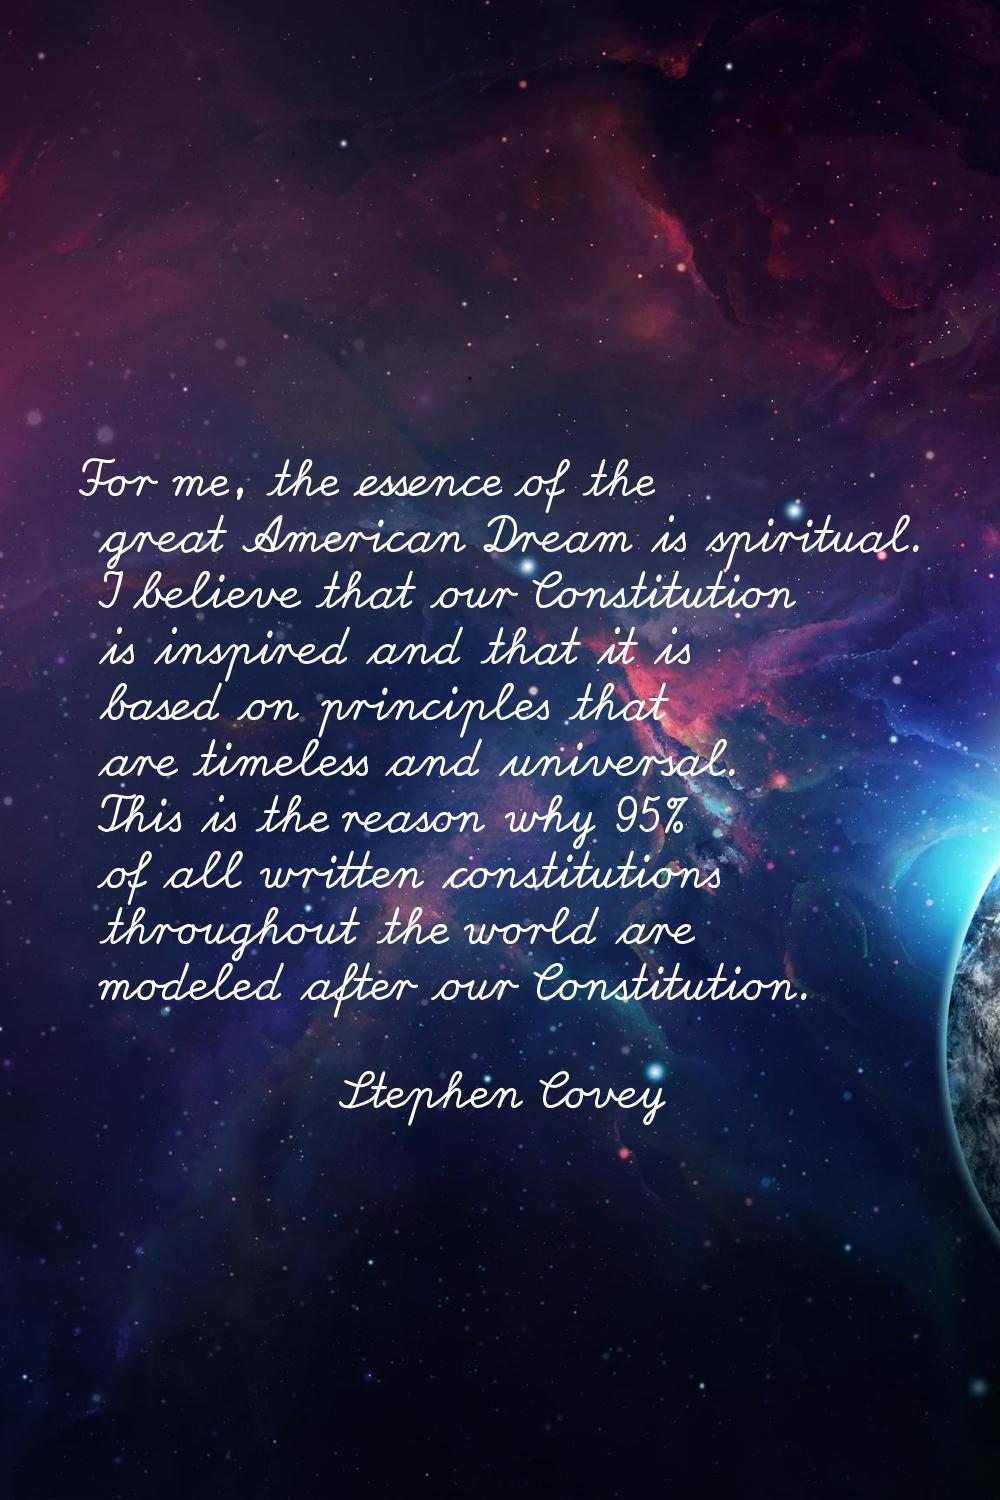 For me, the essence of the great American Dream is spiritual. I believe that our Constitution is in